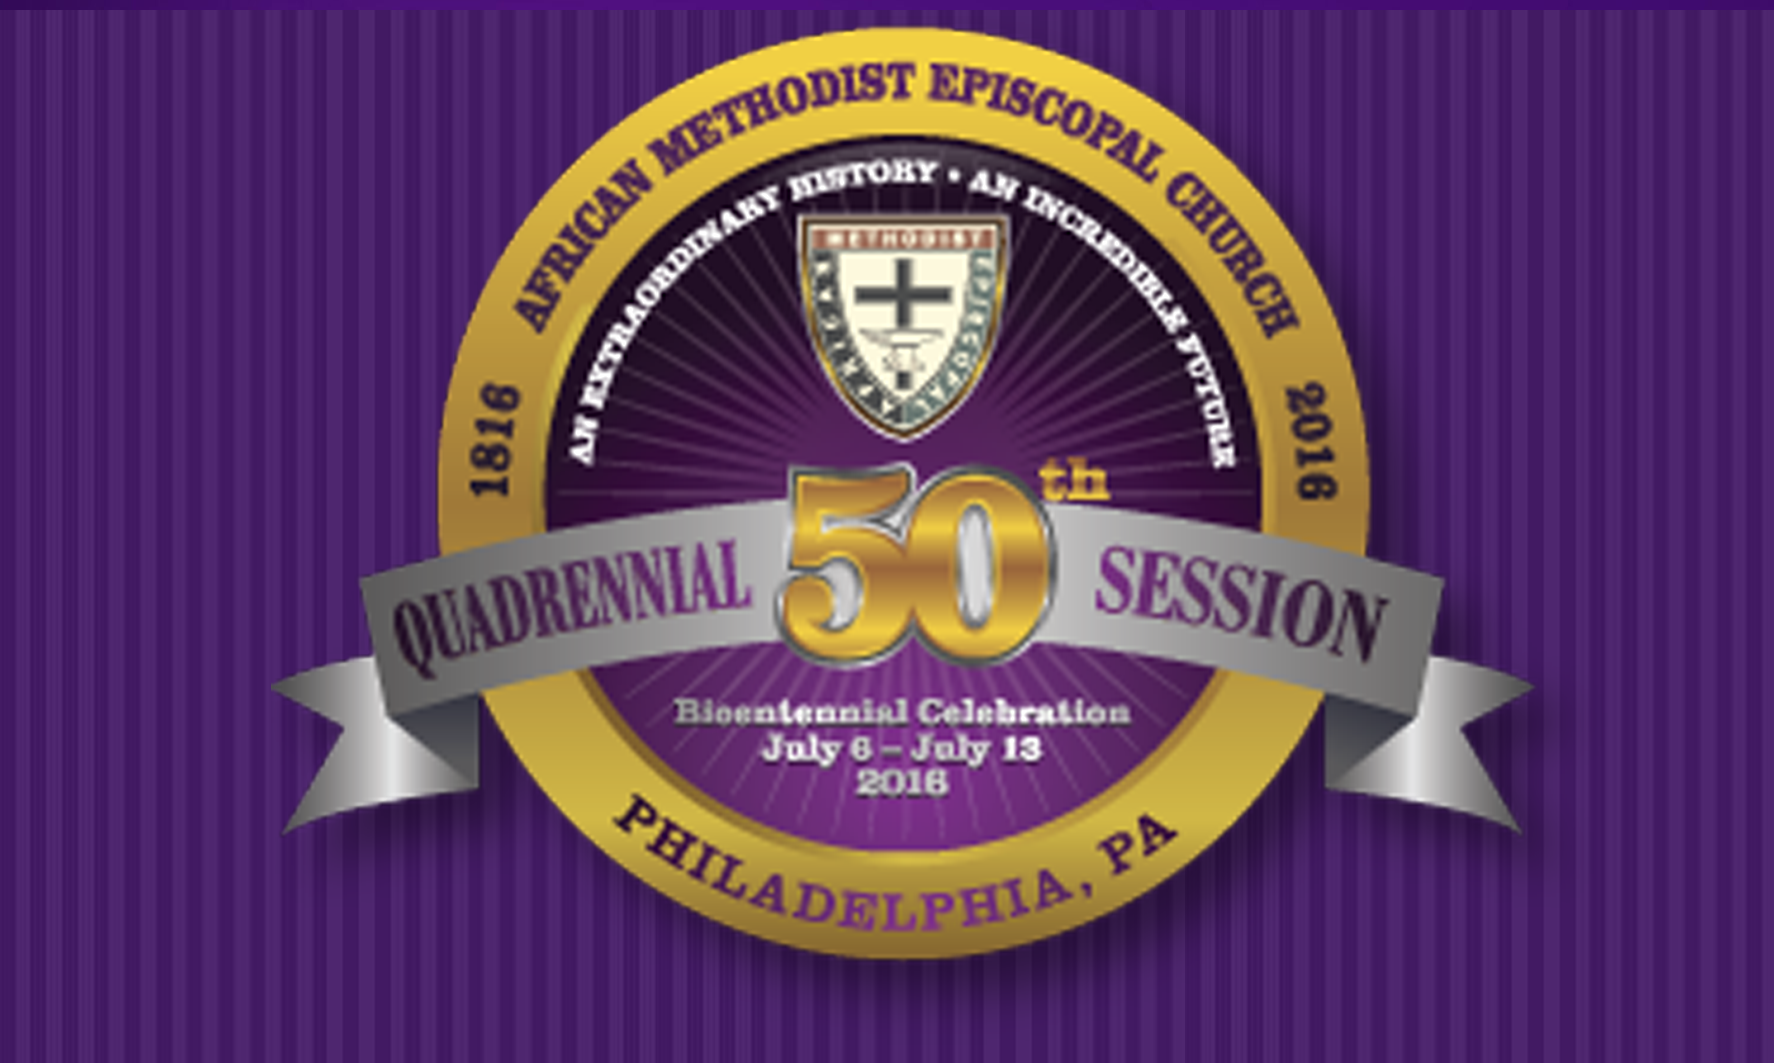 AME Church 50th Quadrennial session and General Conference 2016 Philadelphia USA